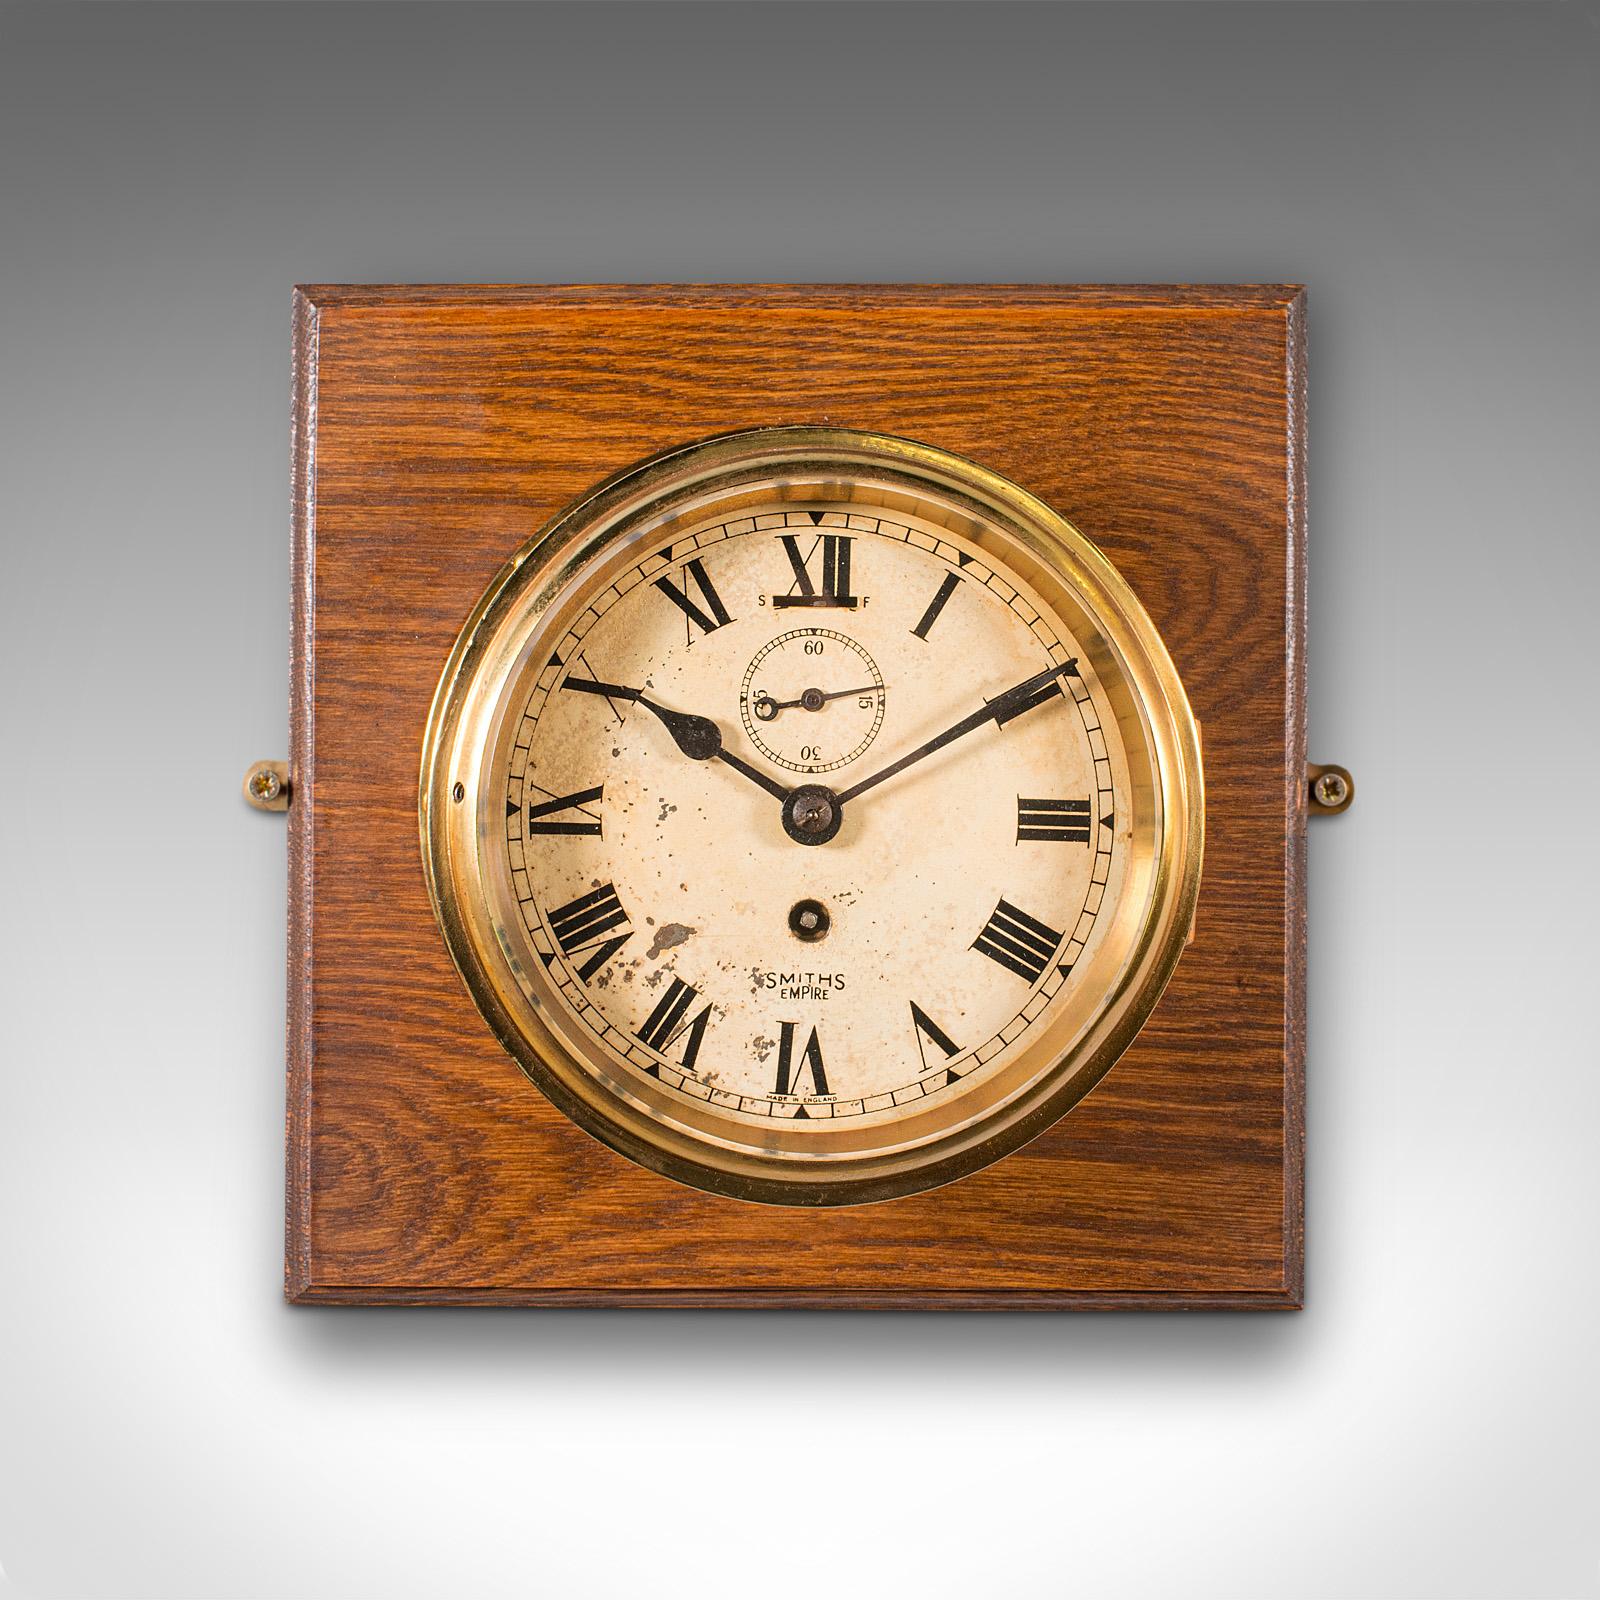 This is a vintage ship's bulkhead clock. An English, brass over oak maritime timepiece, dating to the early 20th century, circa 1930.

Attractive presentation to this time-served clock
Displays a desirable aged patina and in good order
Polished